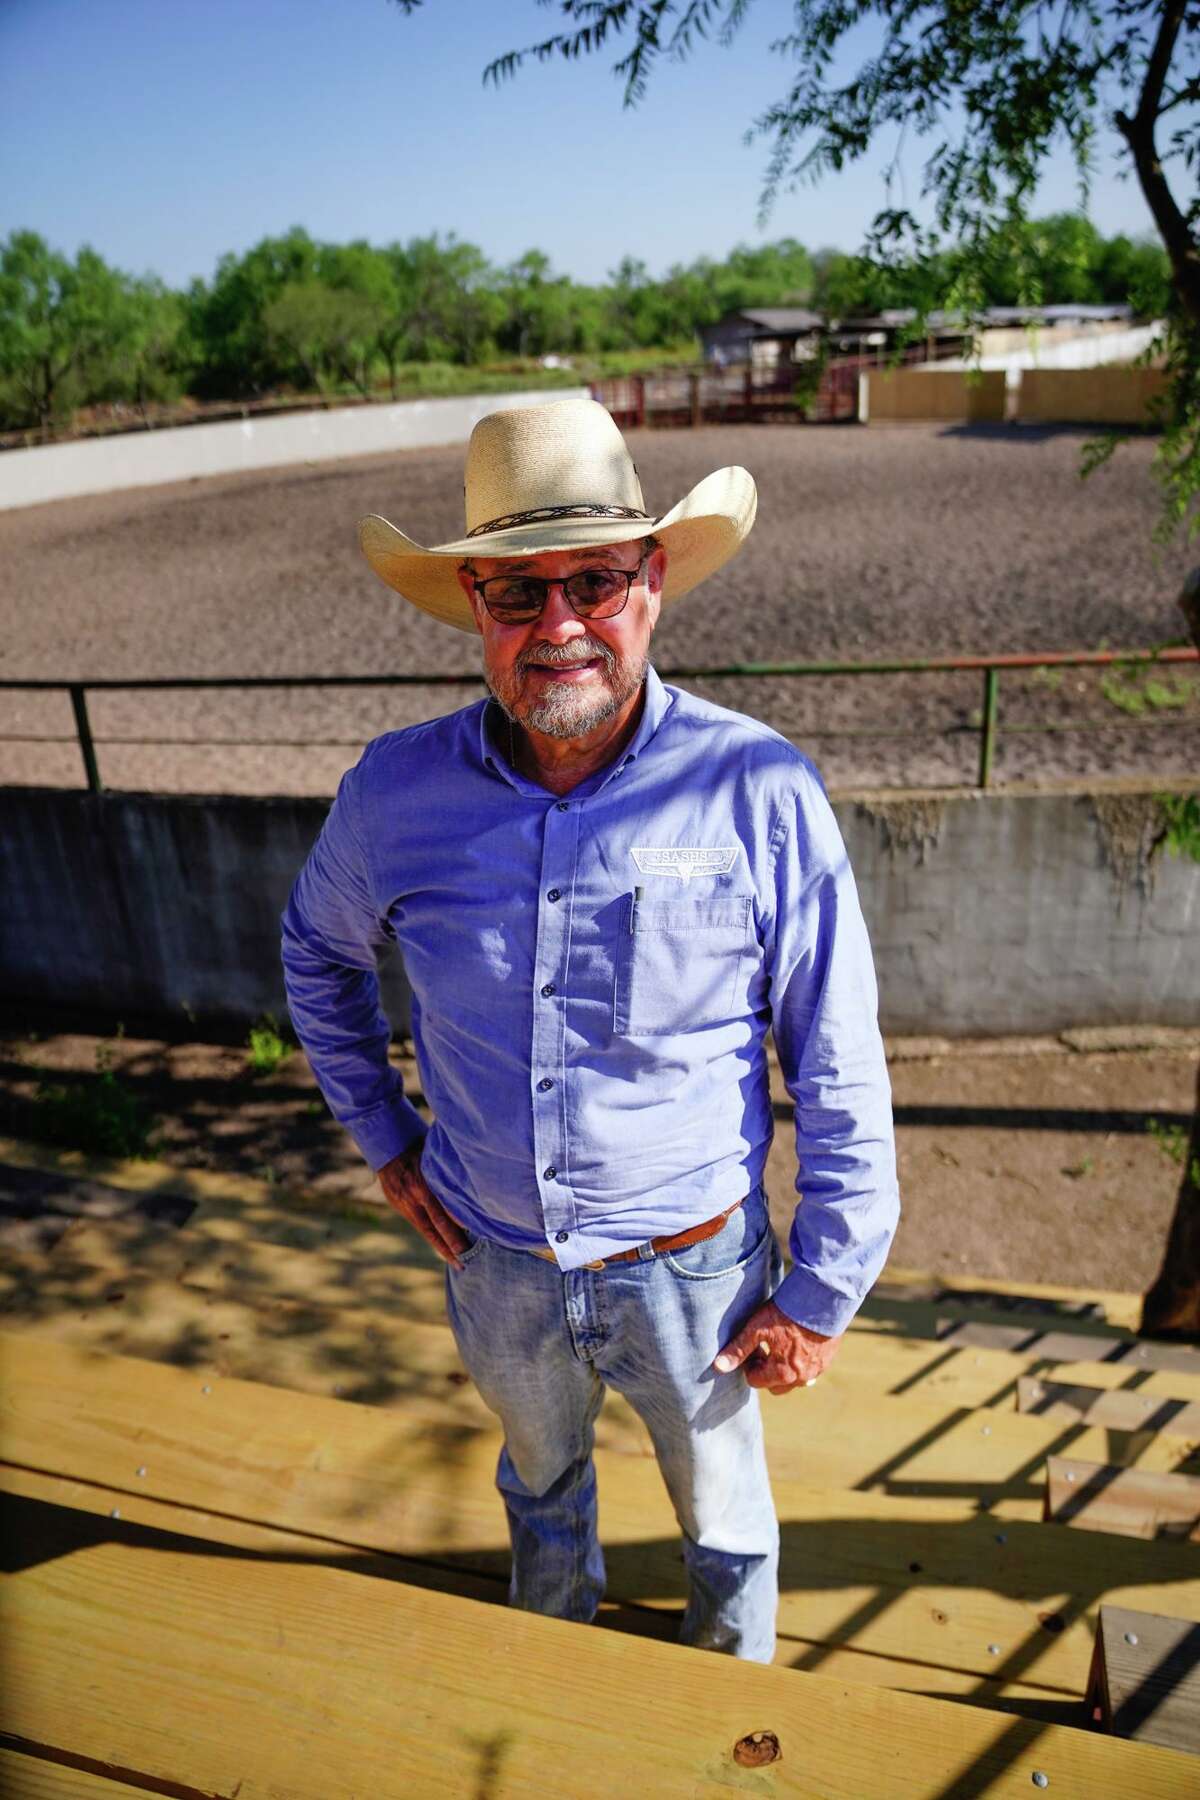 Bobby Acosta of the San Antonio Stockyards Historical Society is leading the rebuilding effort of a former South Side charro ranch, which will be a ranch rodeo events center and 4-H and FFA site for underprivileged kids.